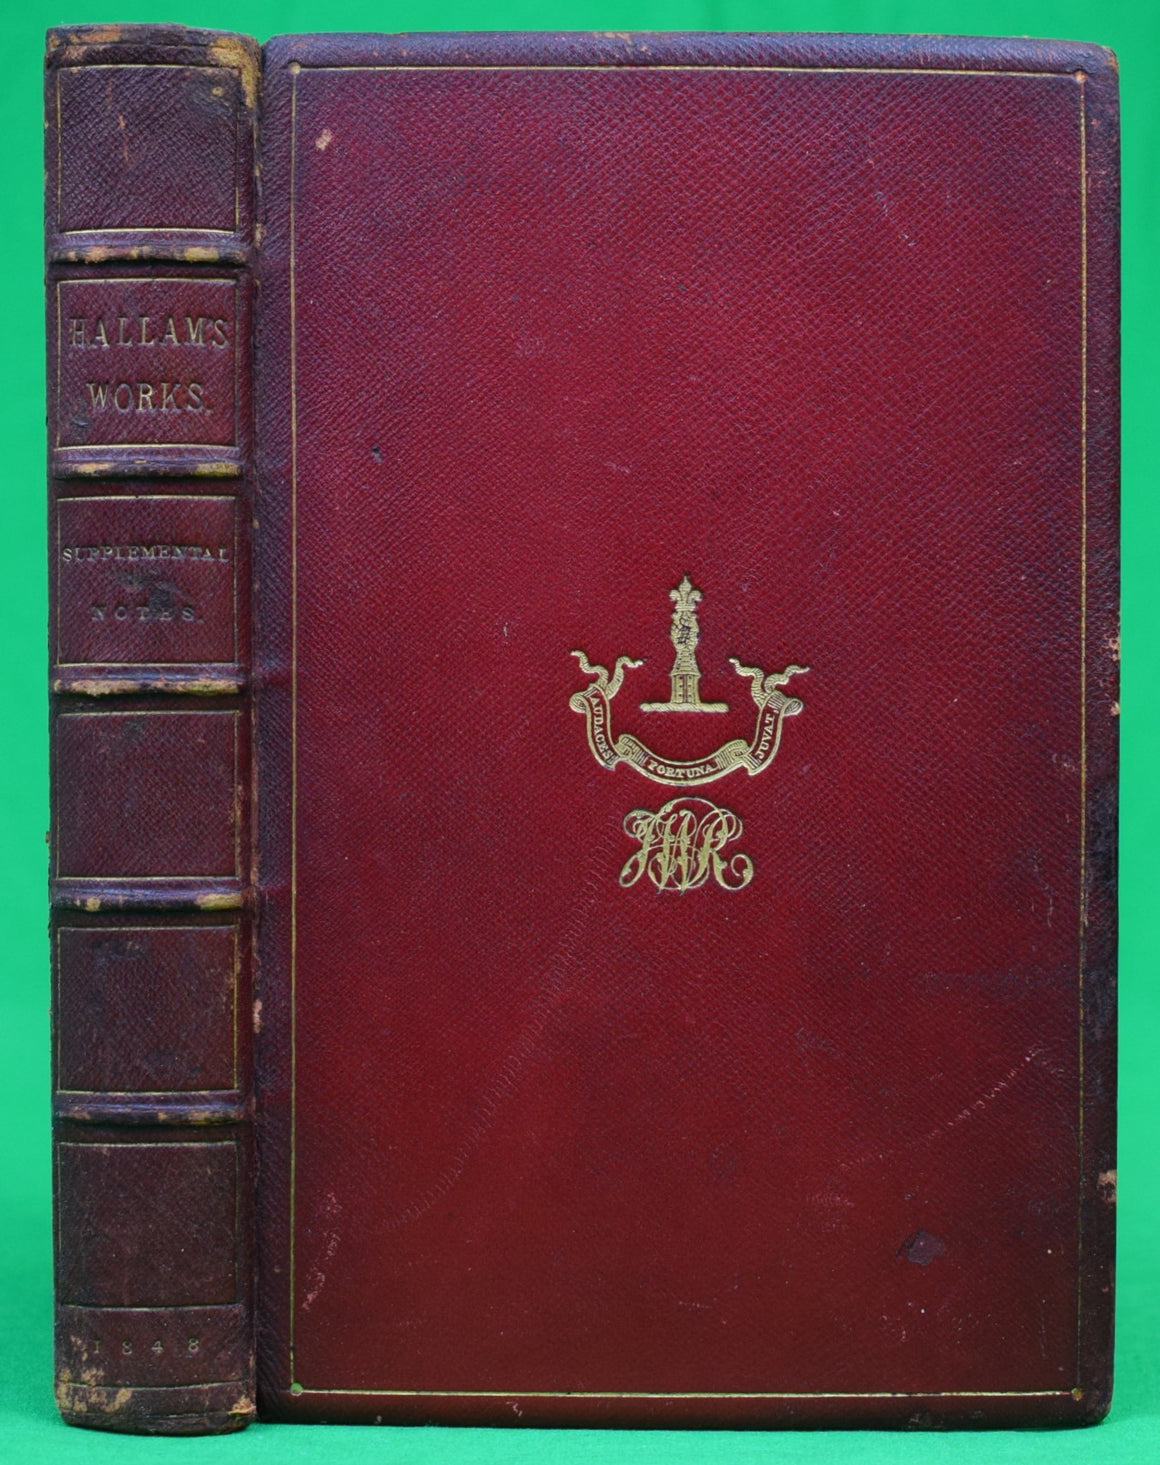 "Supplemental Notes To The View Of The State Of Europe During The Middle Ages" 1848 HALLAM, Henry